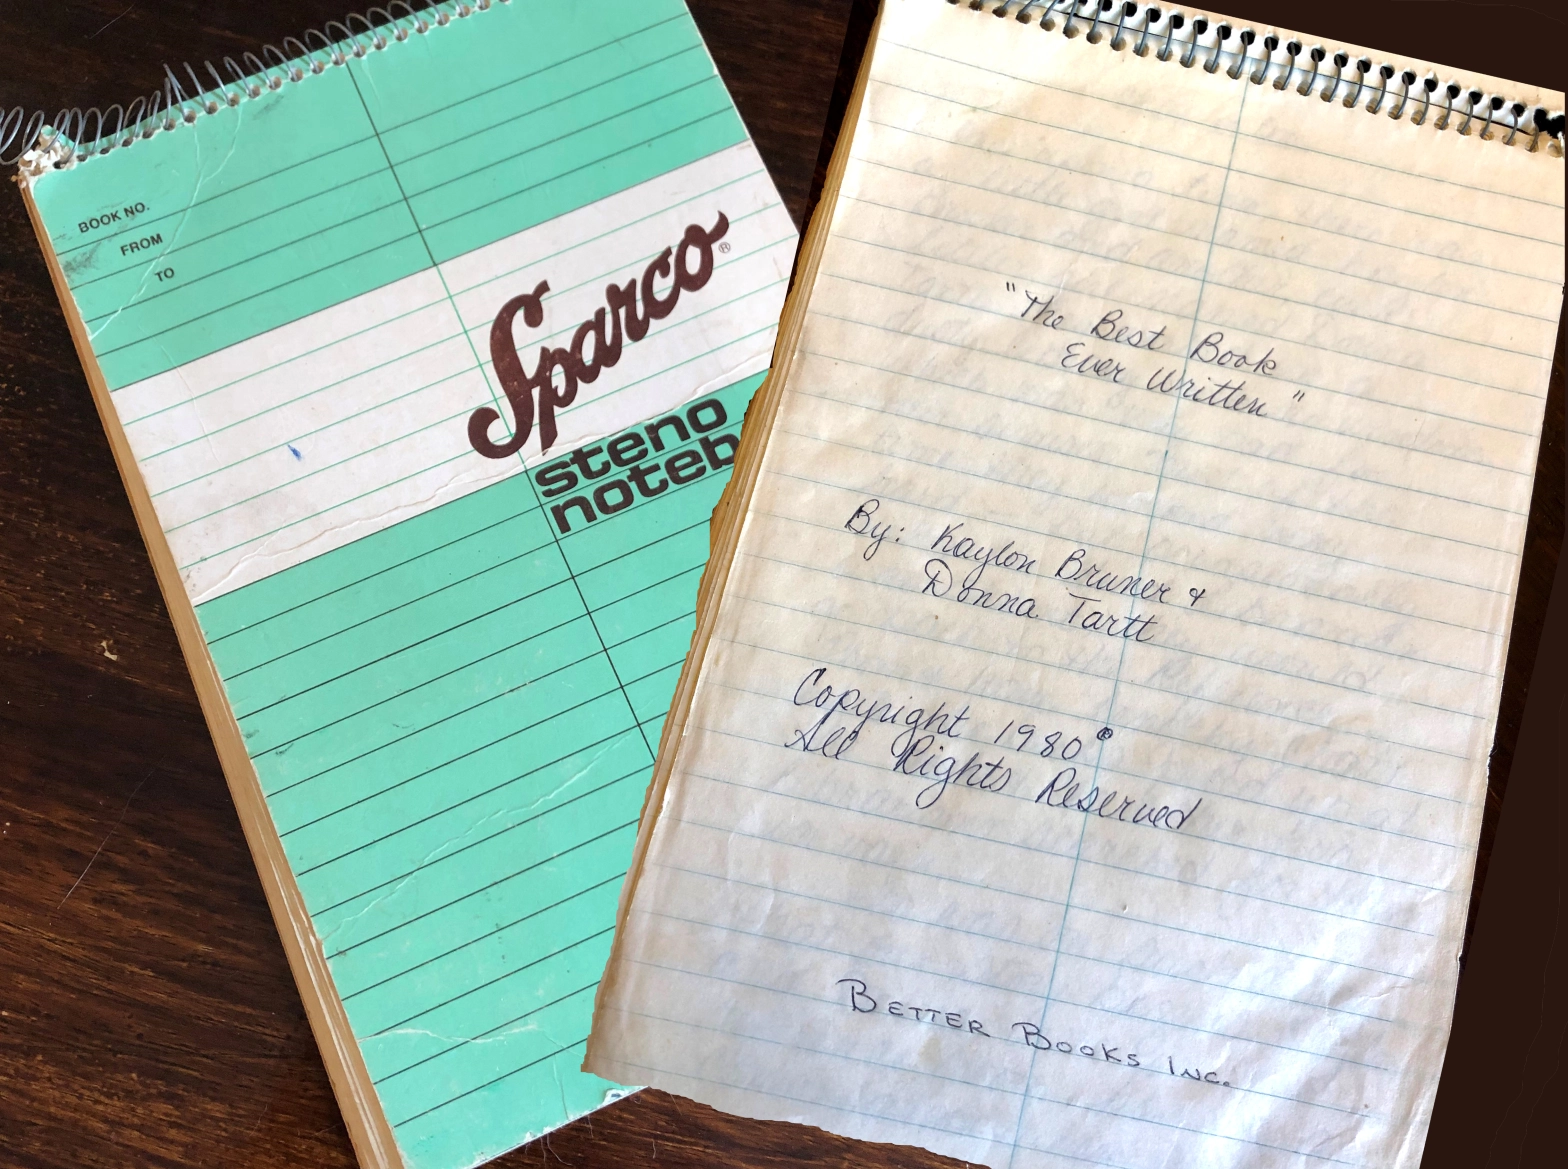 Donna Tartt is the award-winning author of The Goldfinch and other novels. The attached photo is of the actual steno notebook she bought in 1980 that we used for our writing game. My mom found it in her attic when she moved in 2020.